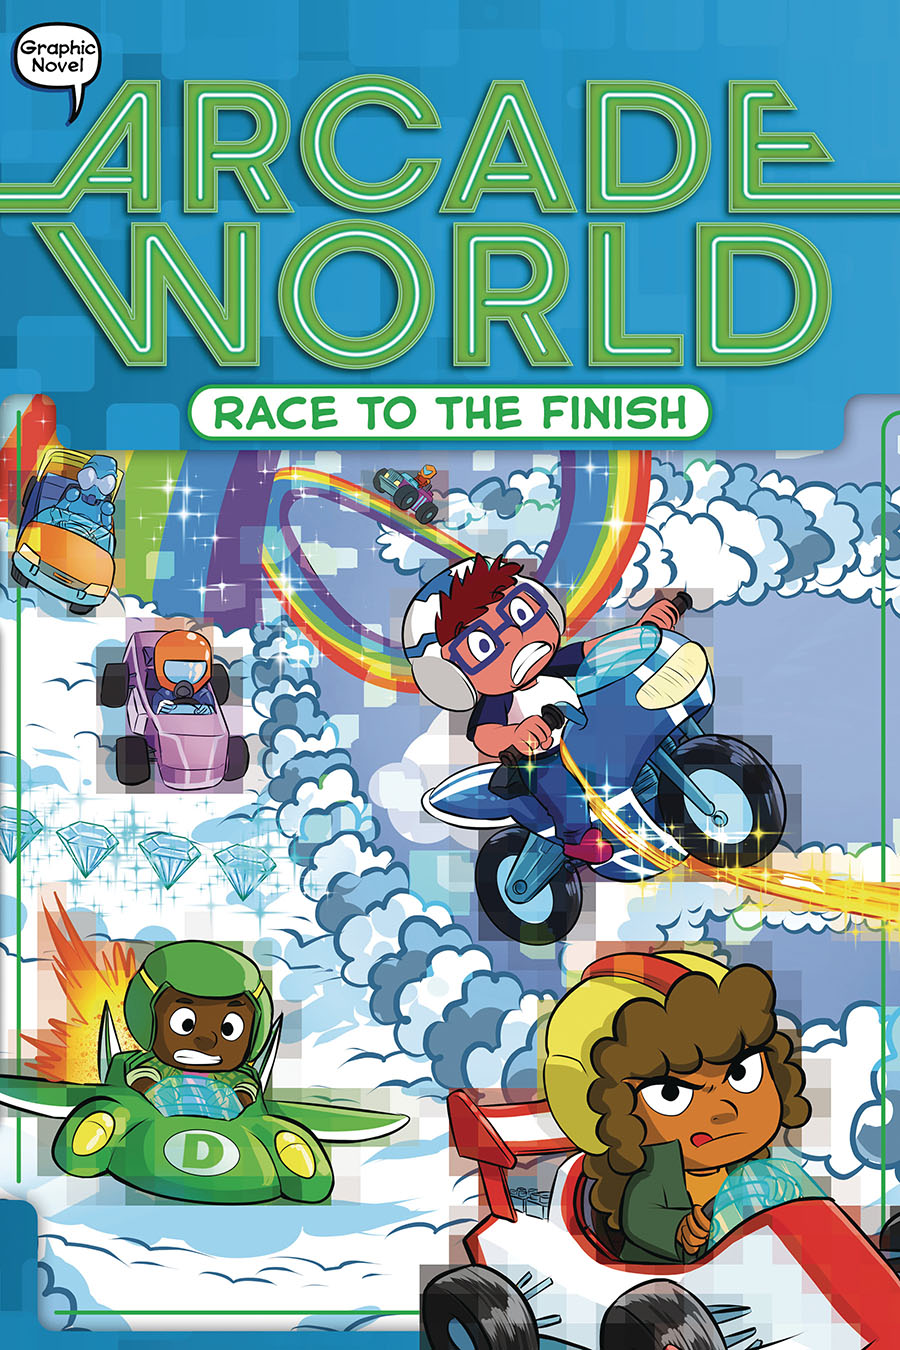 Arcade World Vol 5 Race To The Finish TP